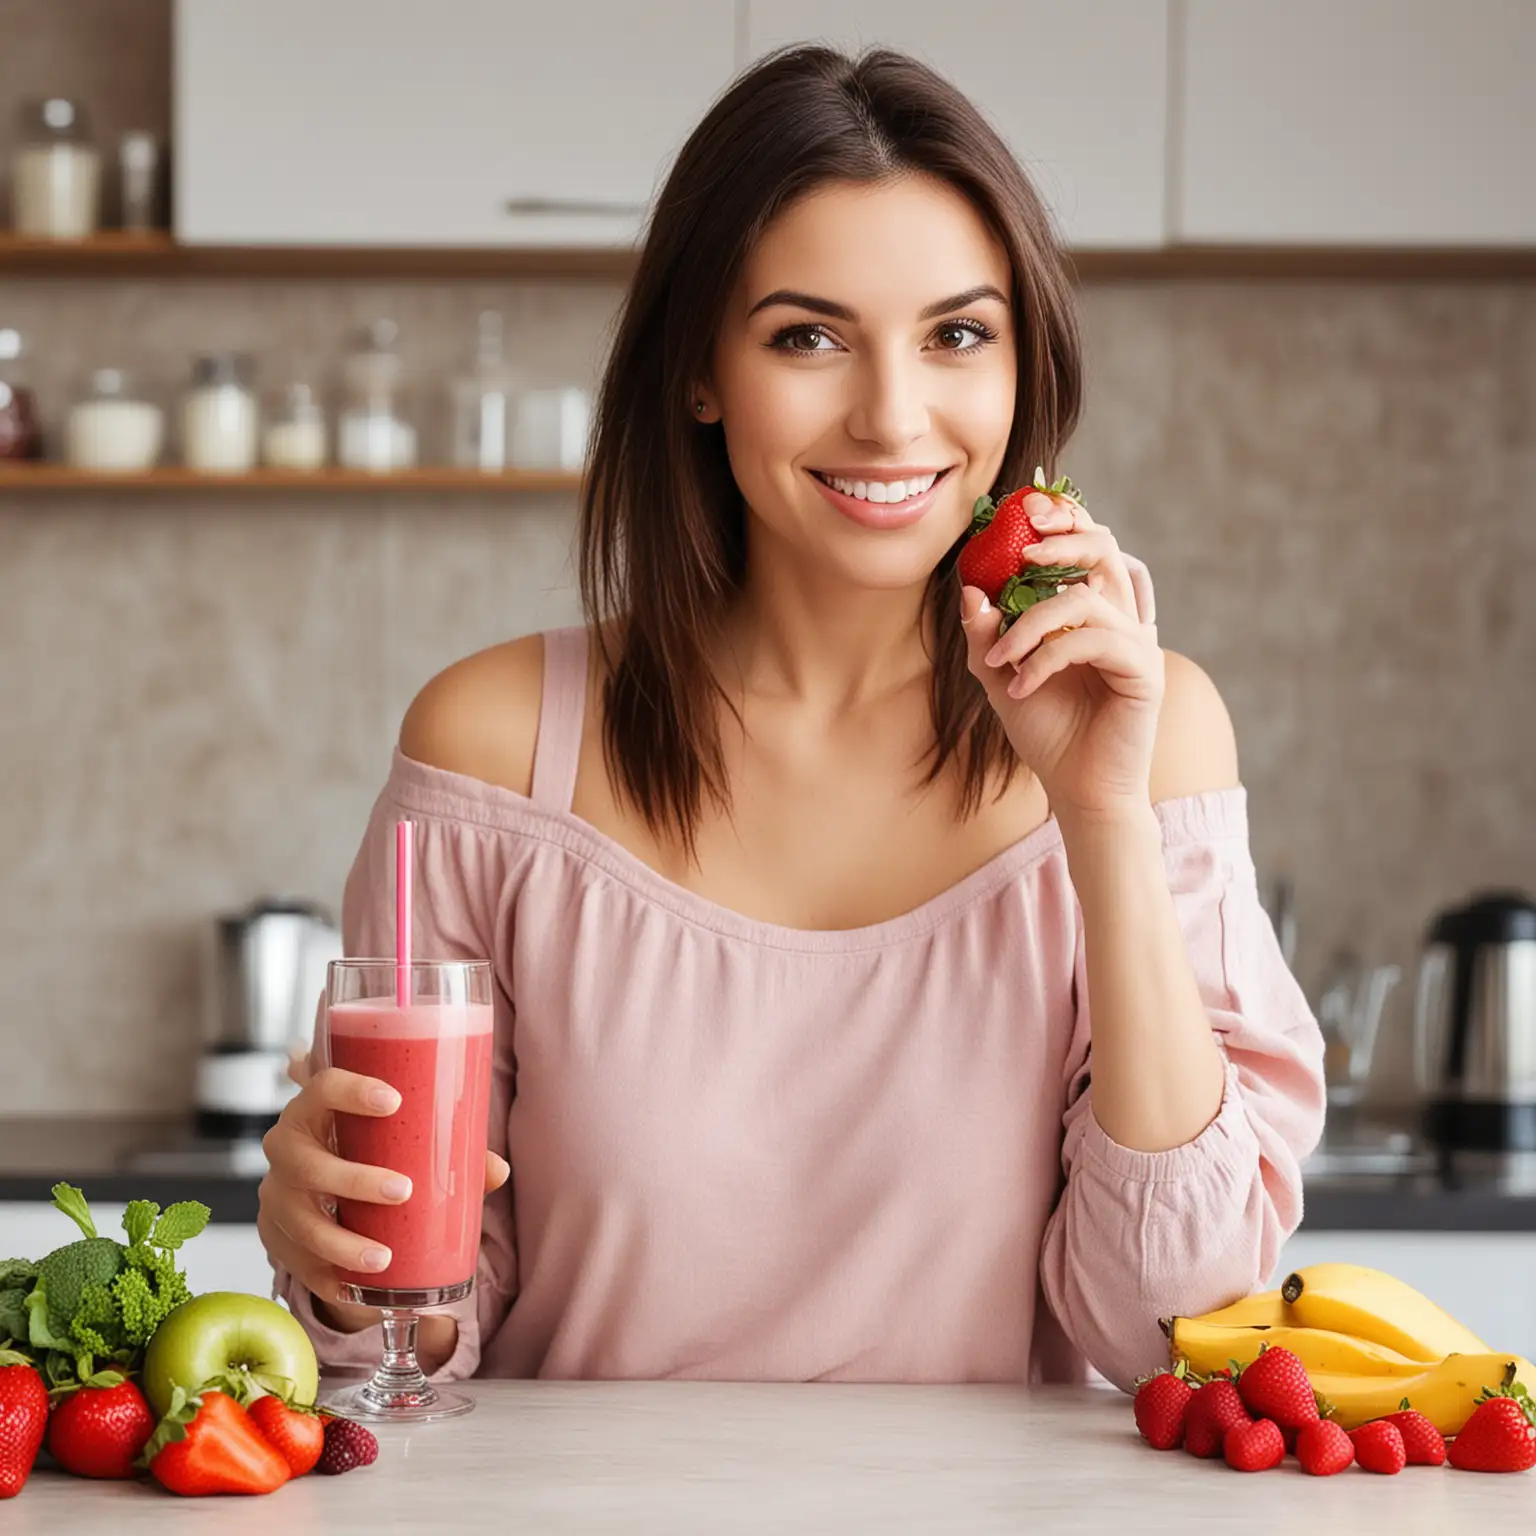 Woman Enjoying Colorful Smoothies Drink